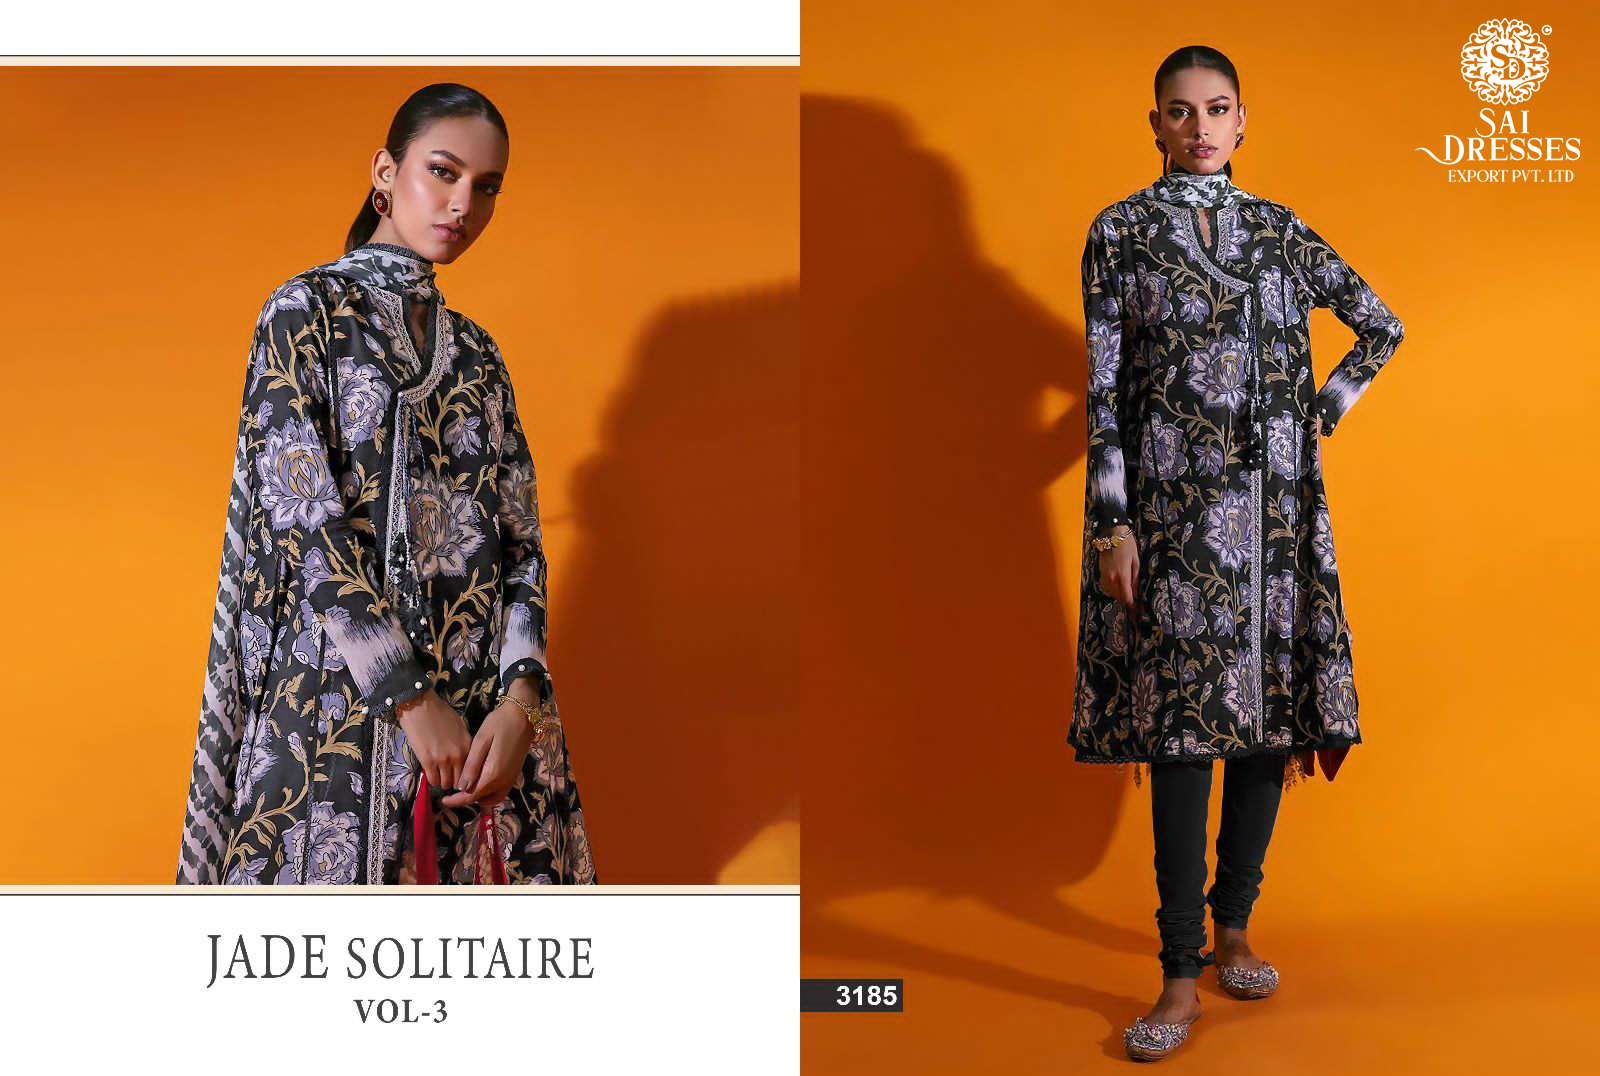 SAI DRESSES PRESENT JADE SOLITAIRE VOL 3 PURE COTTON PATCH EMBROIDERED PAKISTANI SALWAR SUITS IN WHOLESALE RATE IN SURAT